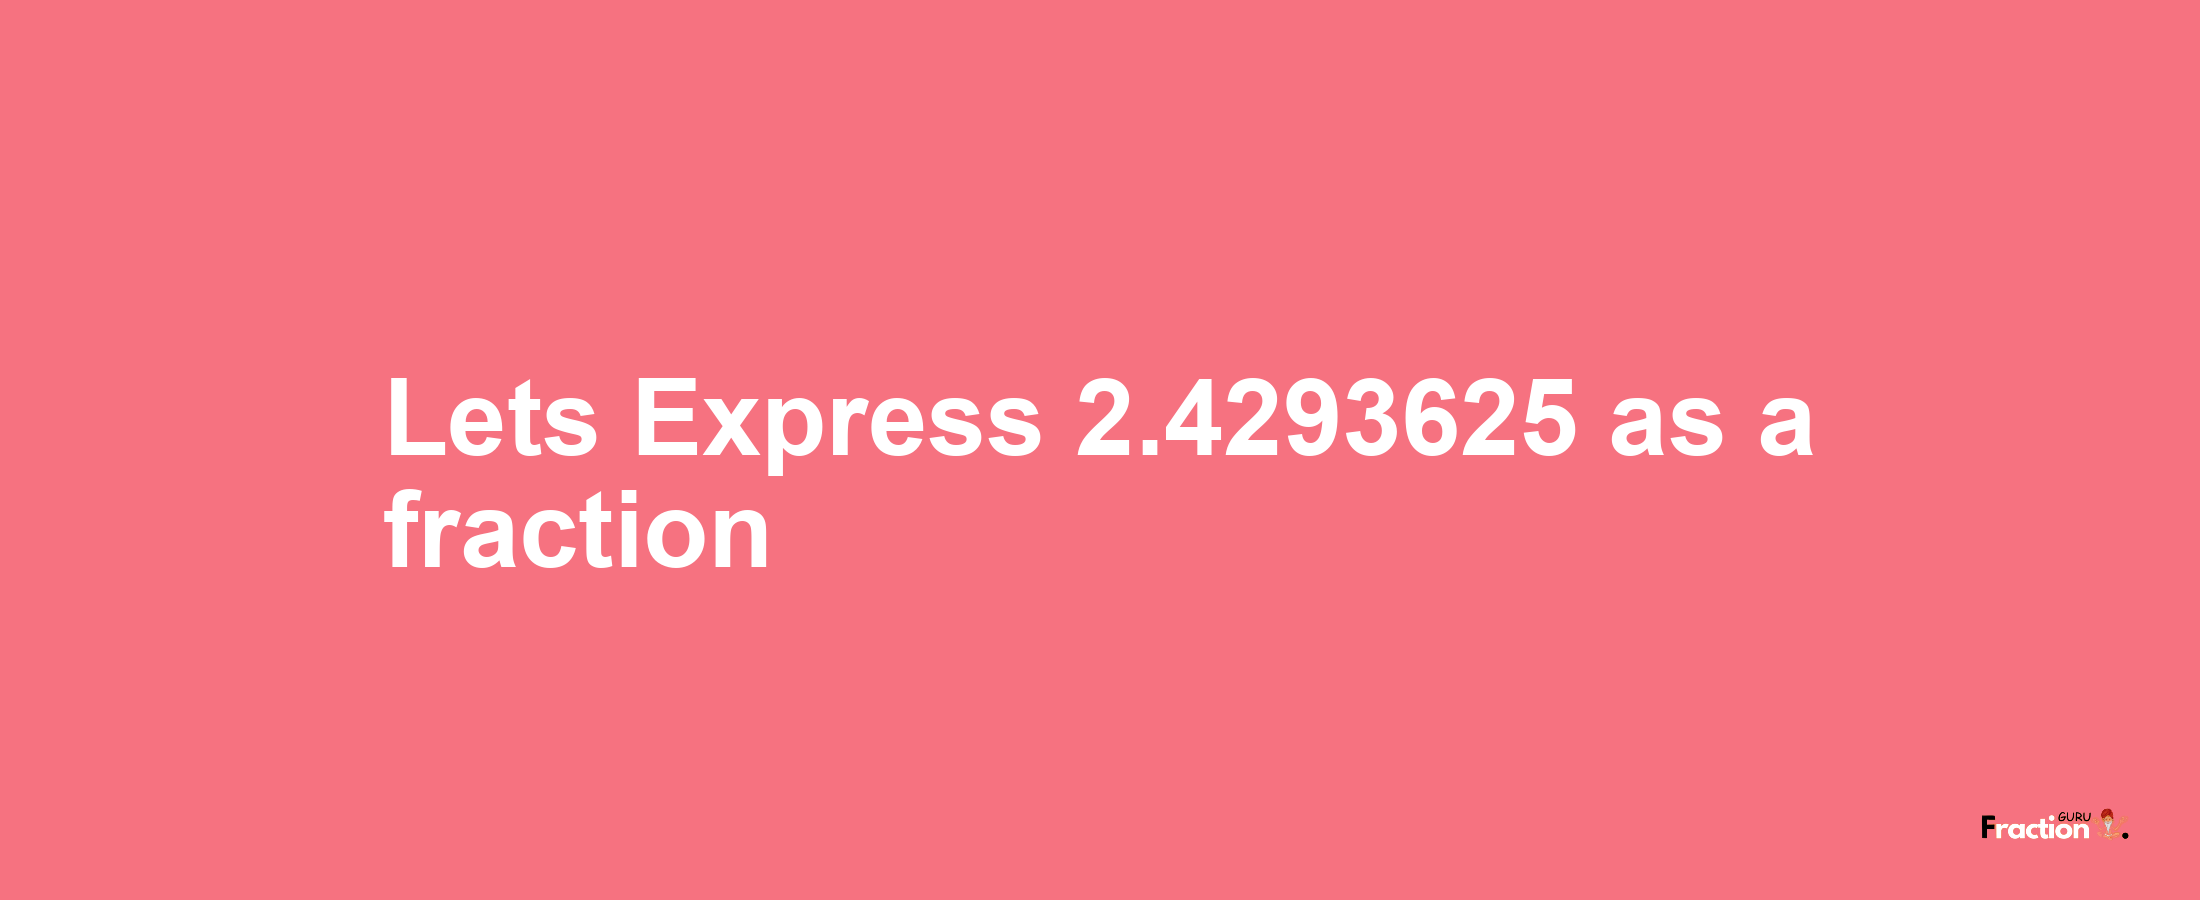 Lets Express 2.4293625 as afraction